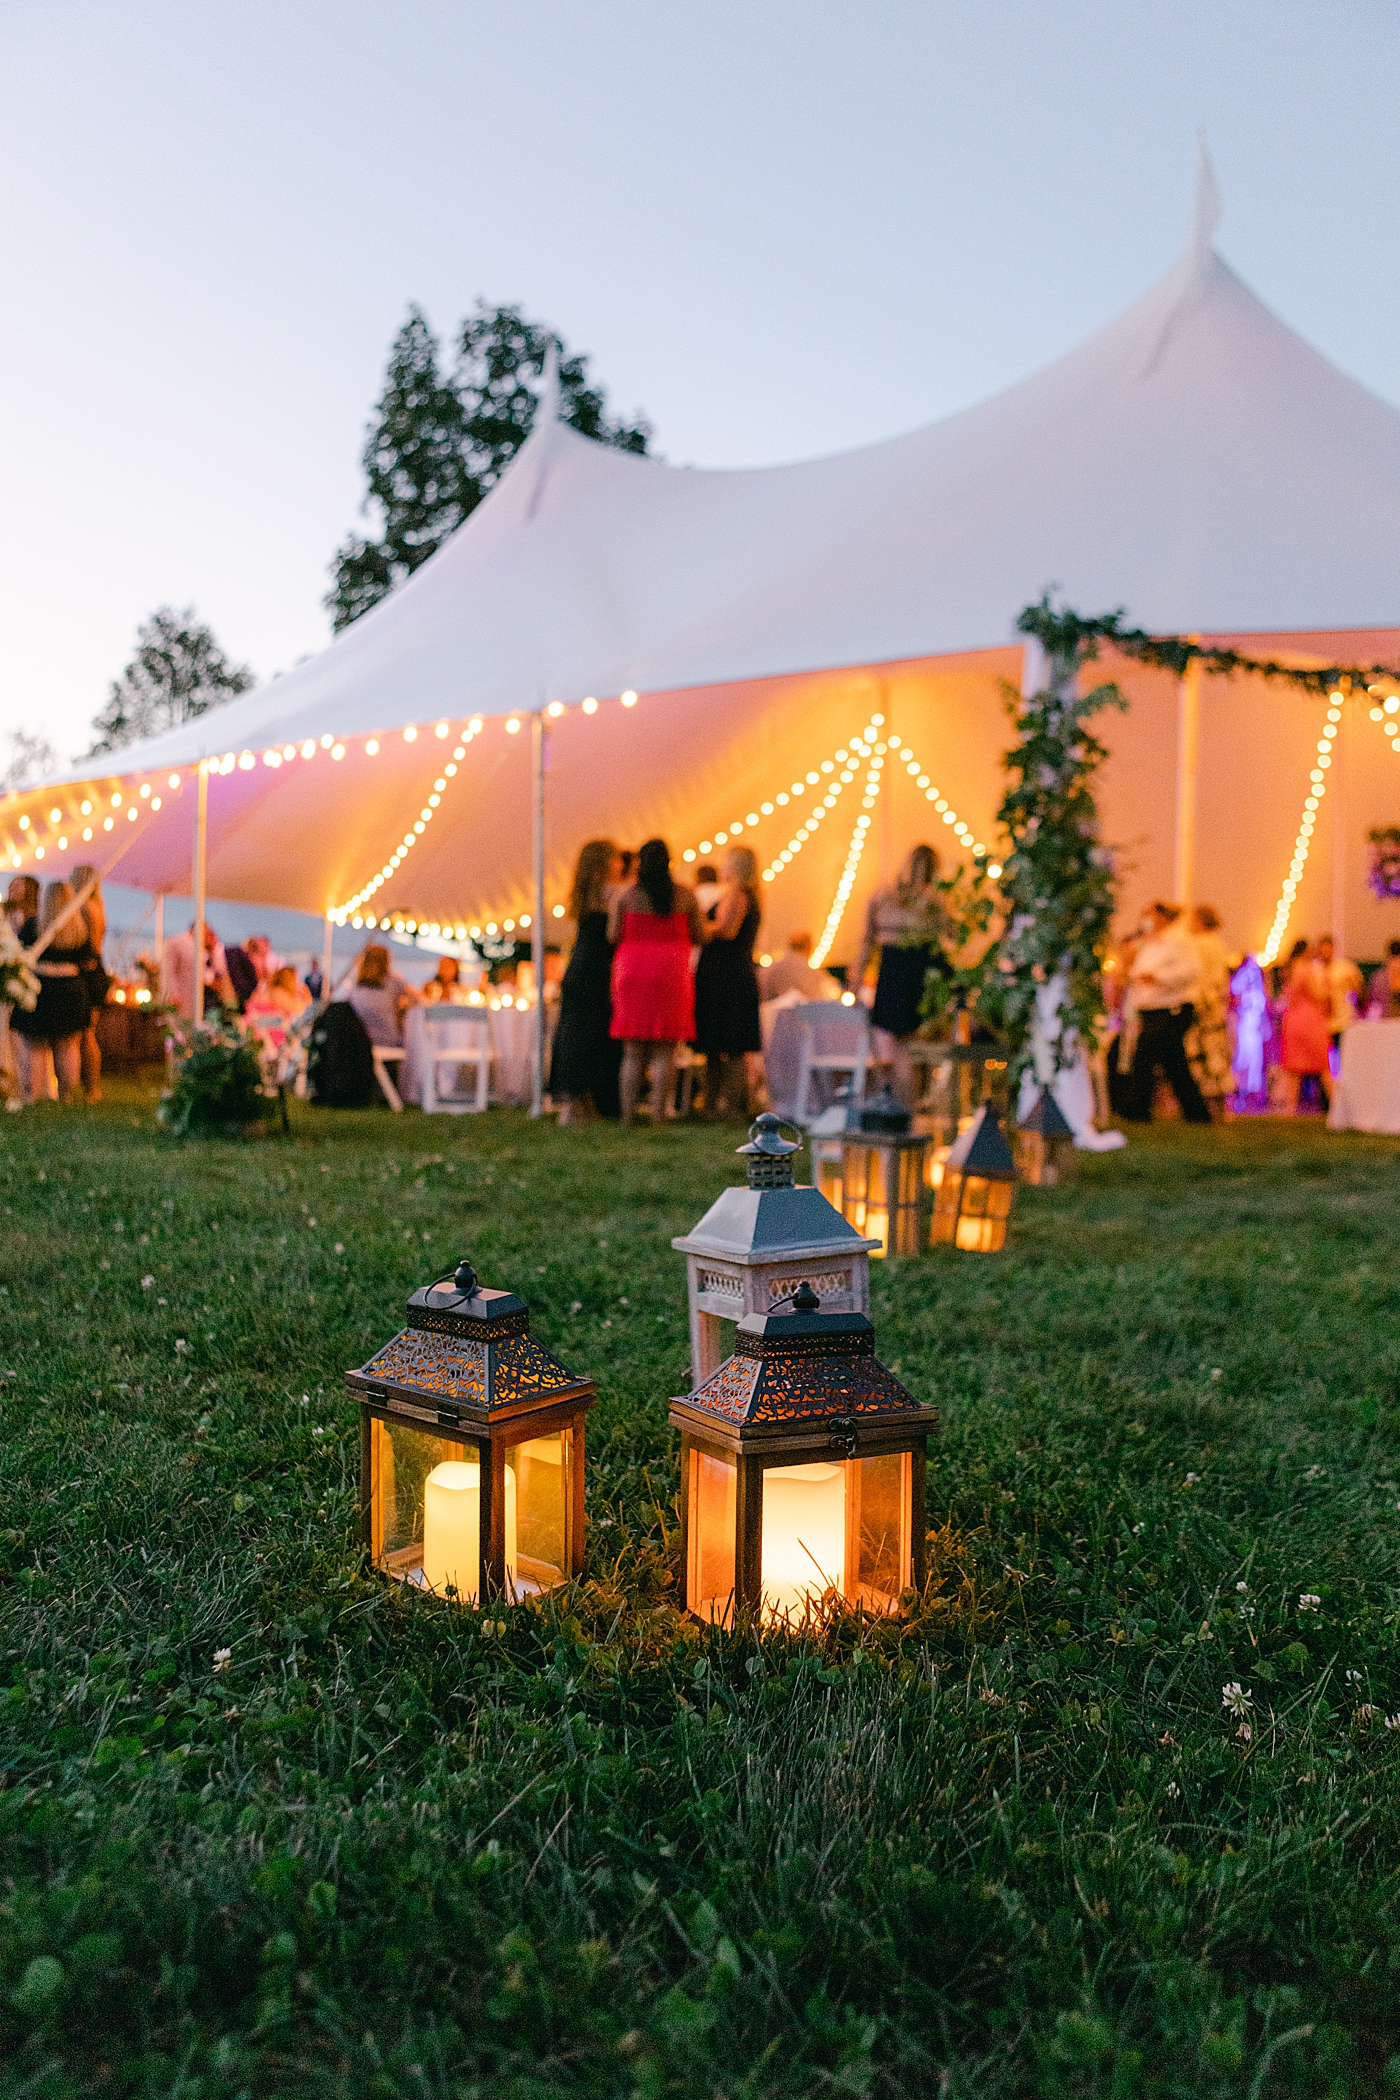 Lanterns during an outdoor wedding | Image by Hope Helmuth Photography